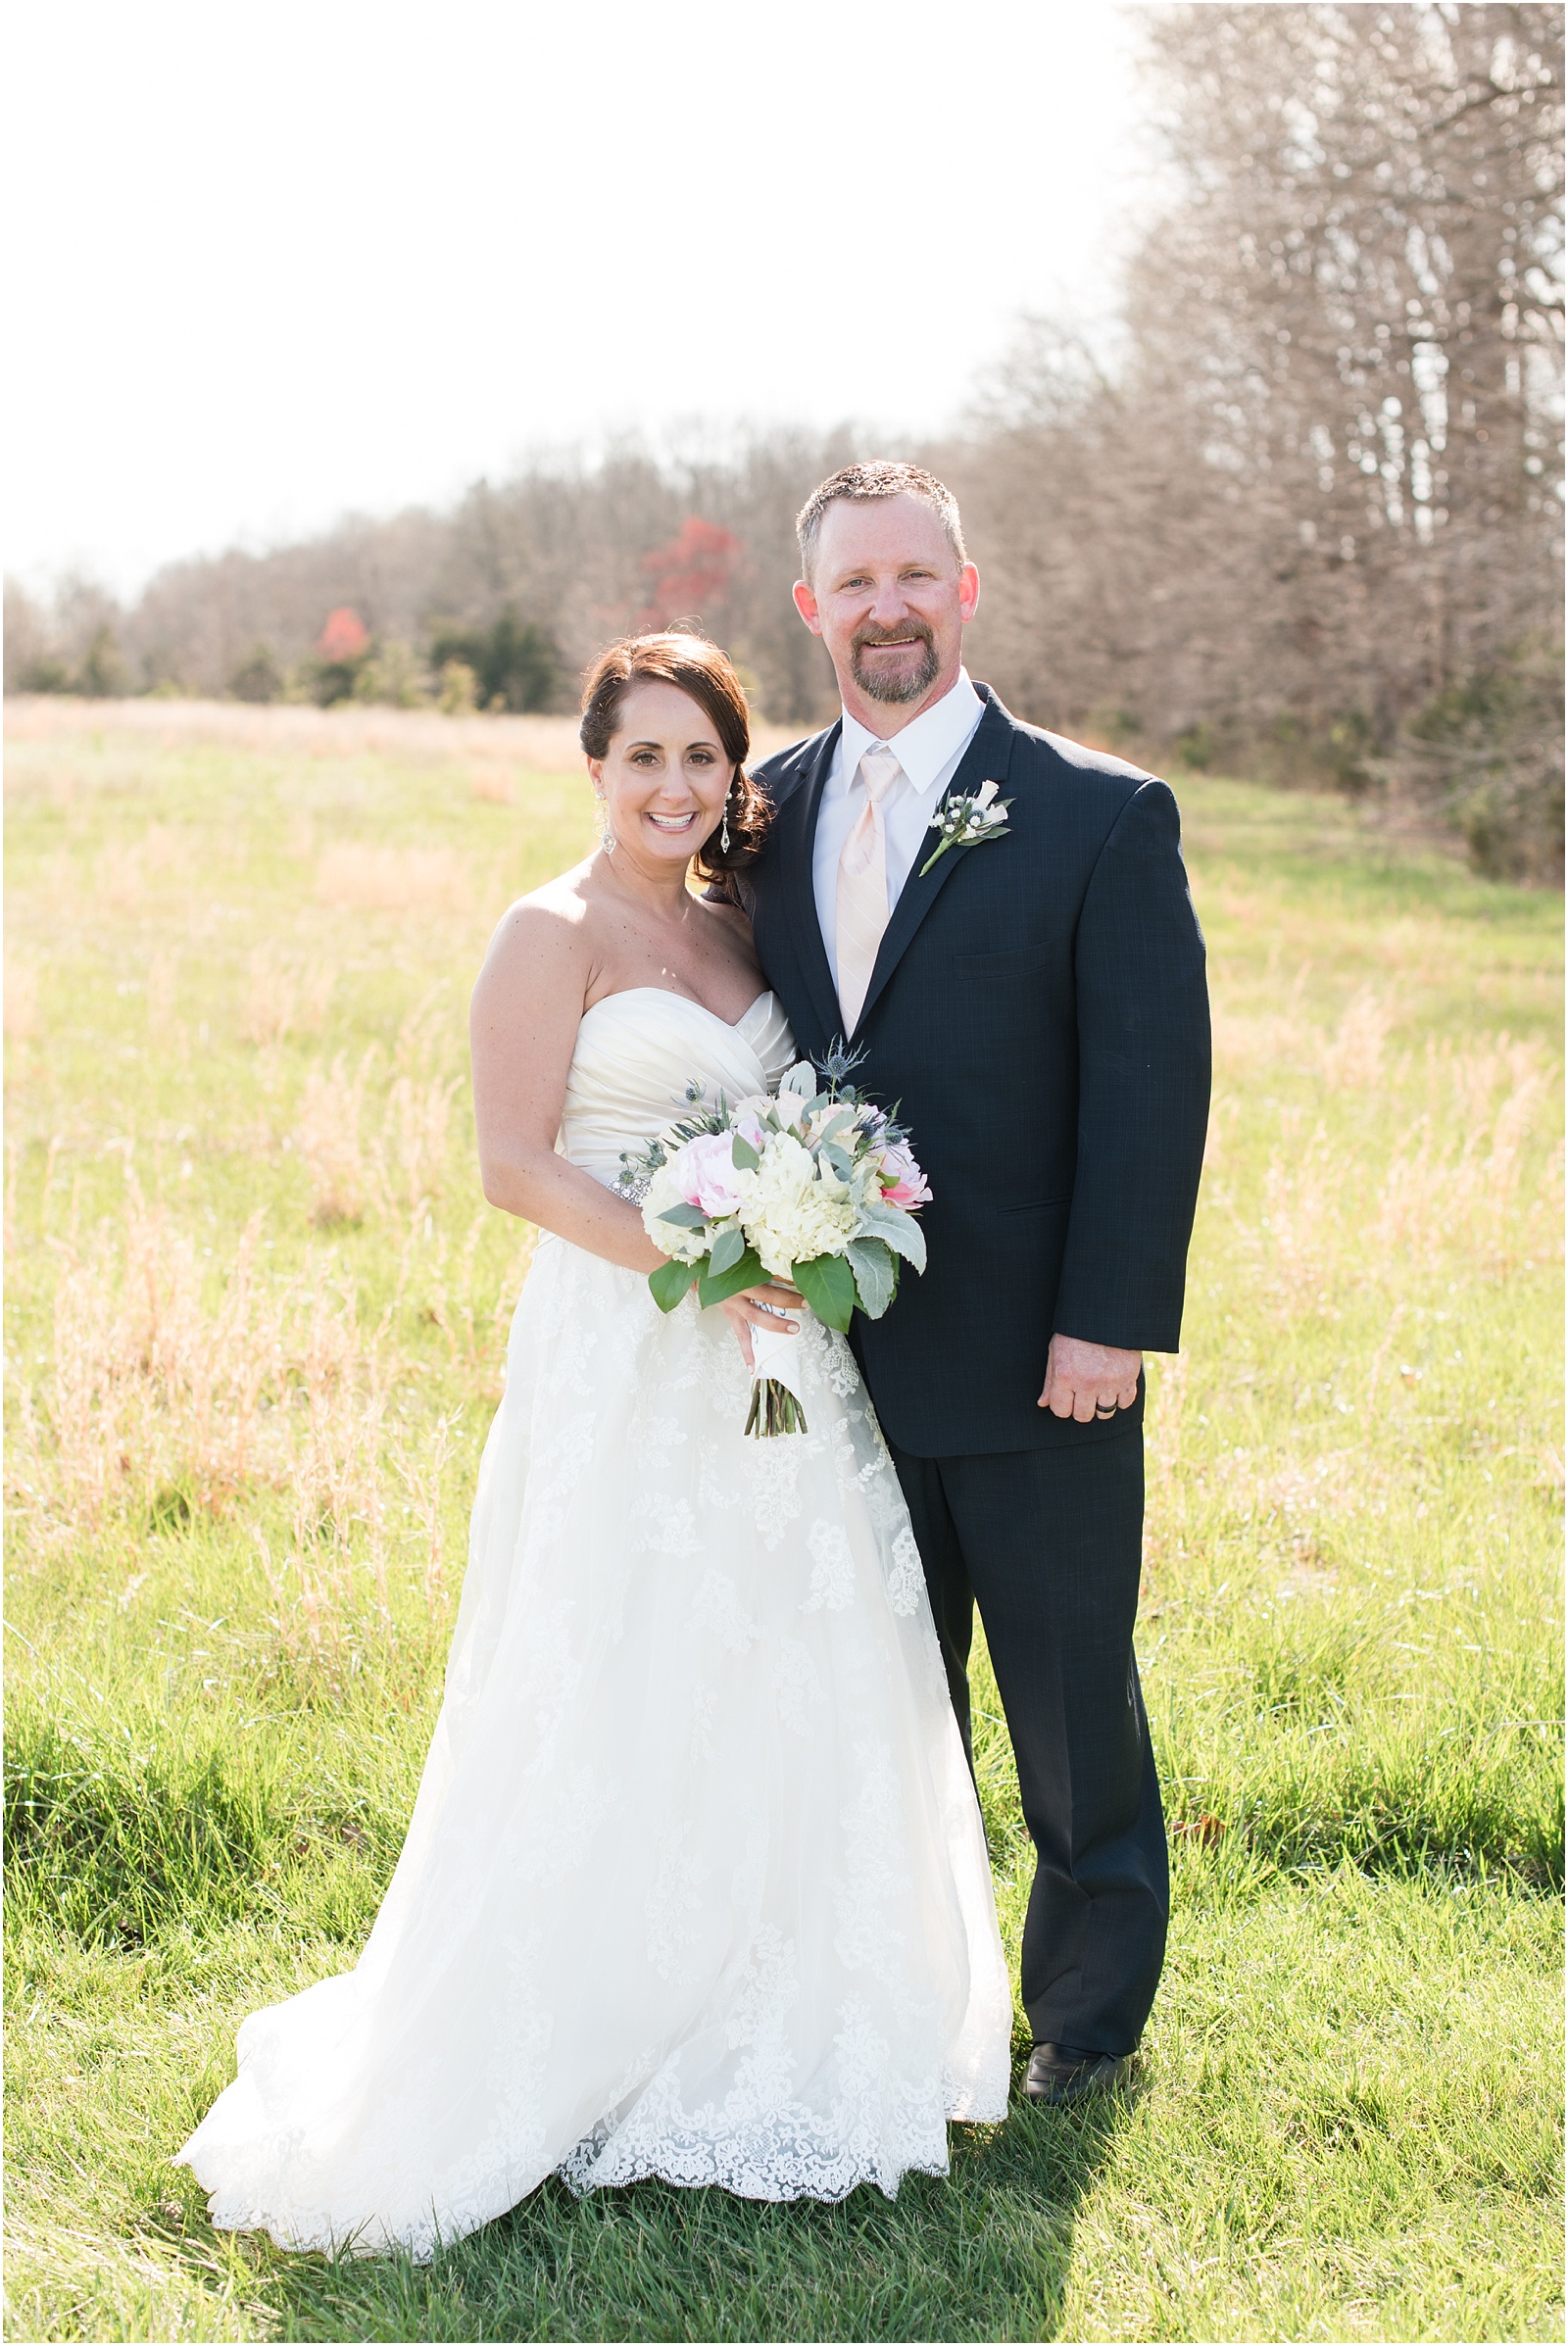 A Country Chic Starlight Meadows Wedding, Burlington NC, Outdoor wedding, wedding rings, wedding invitation suite, groom details, blush wedding bouquet, vintage couch, gray vintage couch